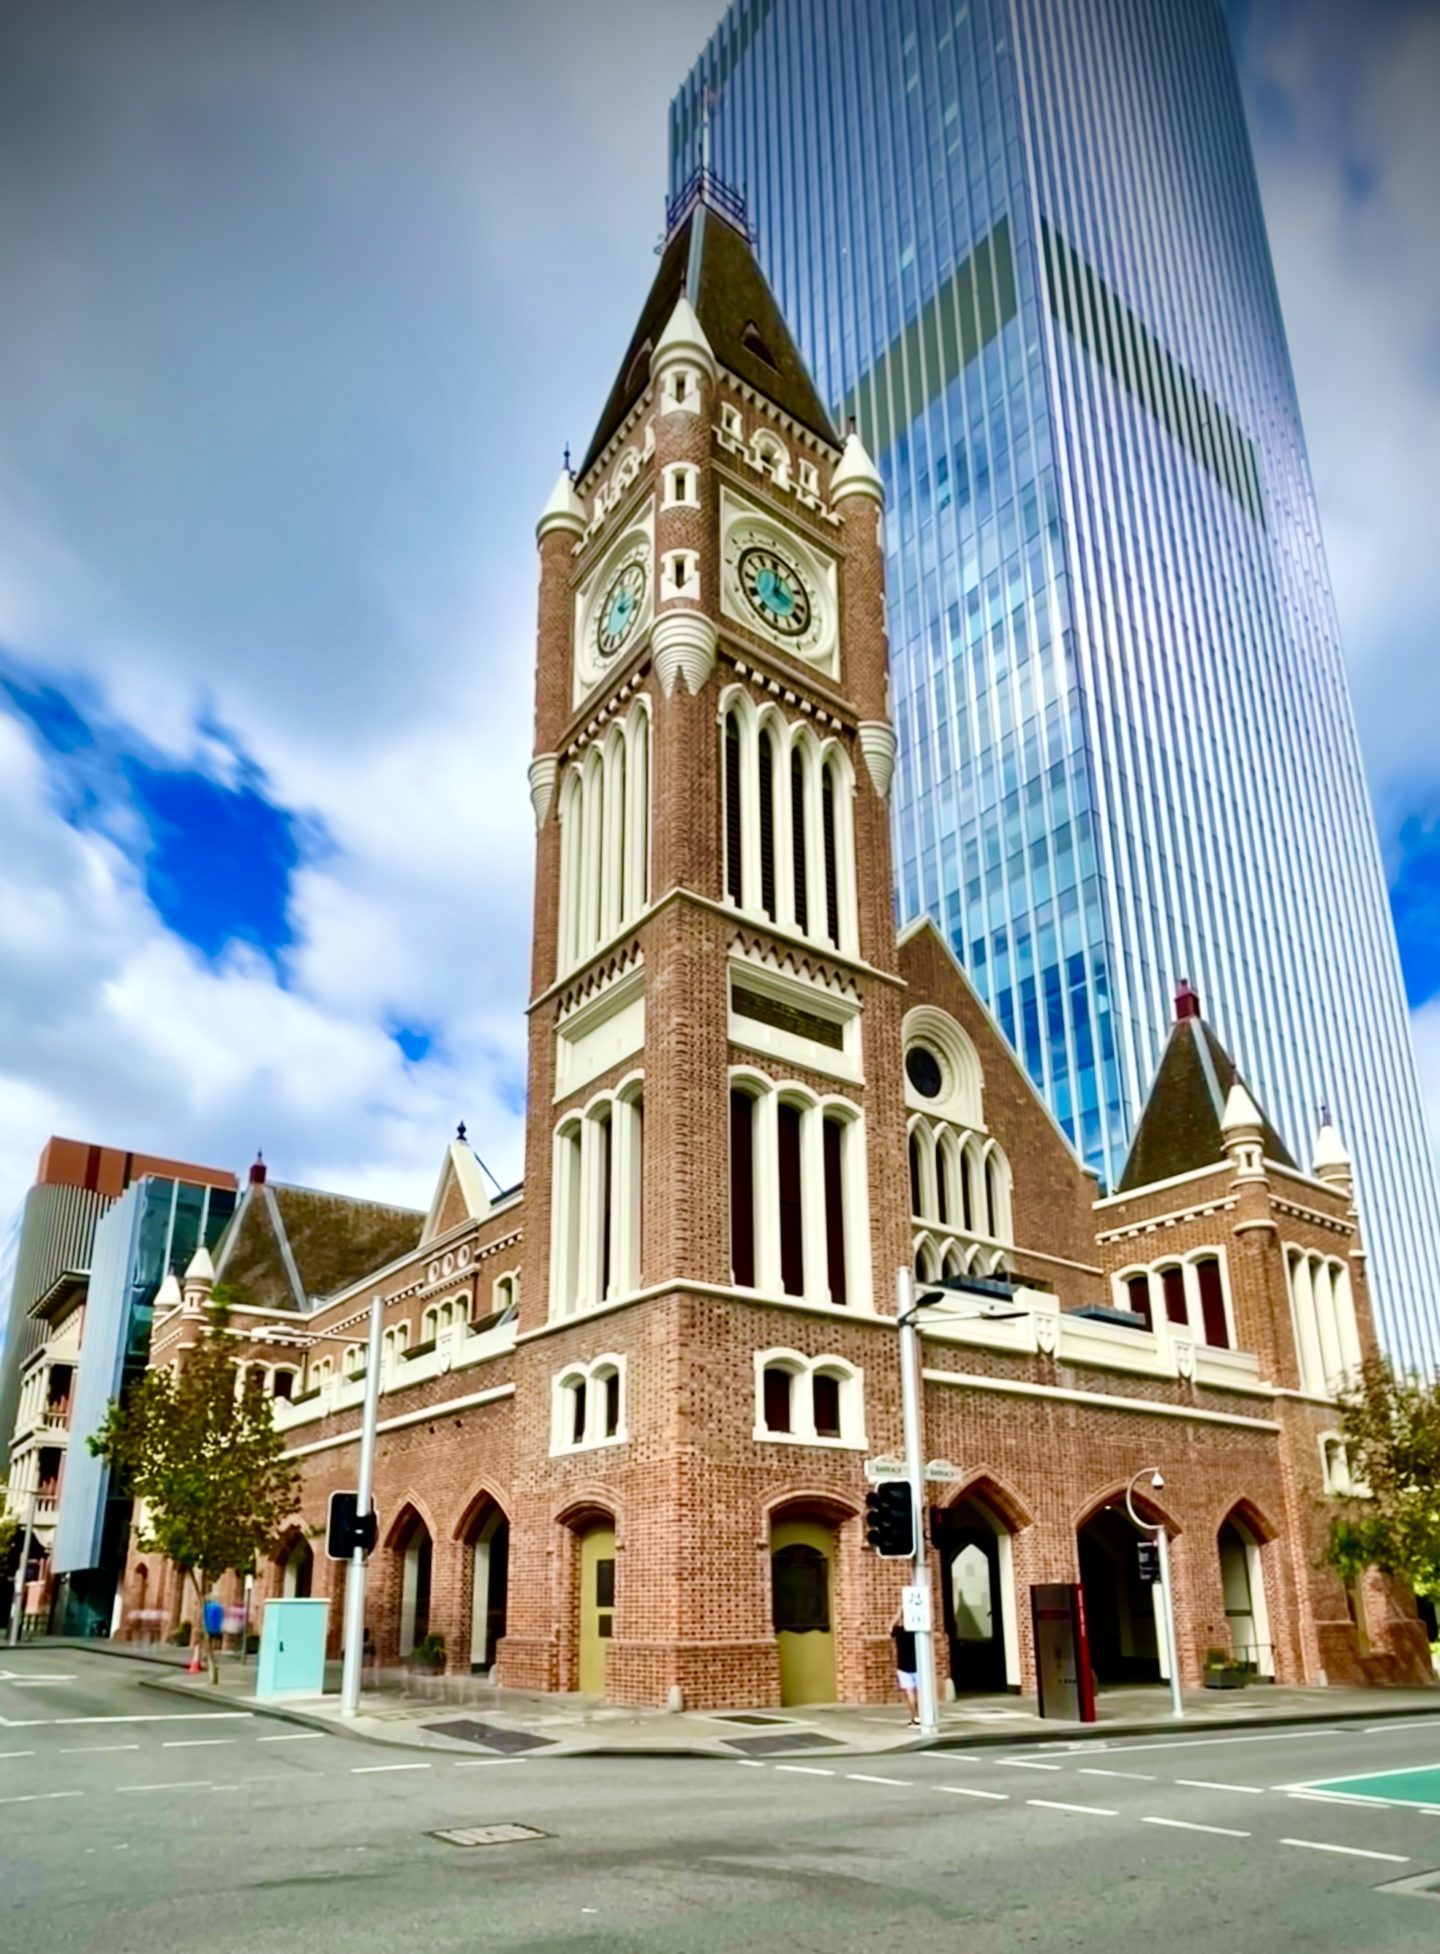 Perth Town Hall